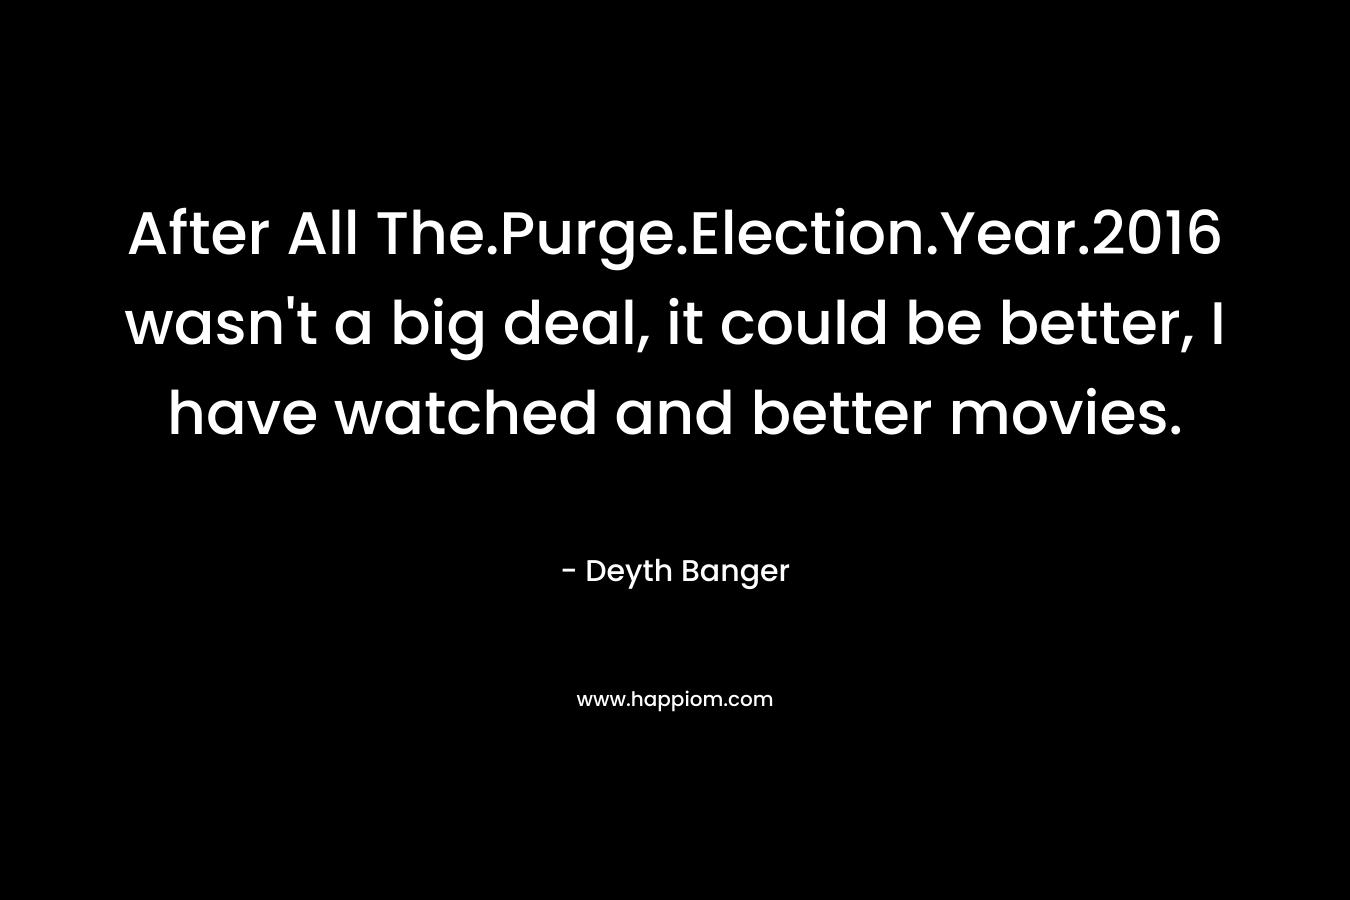 After All The.Purge.Election.Year.2016 wasn't a big deal, it could be better, I have watched and better movies.